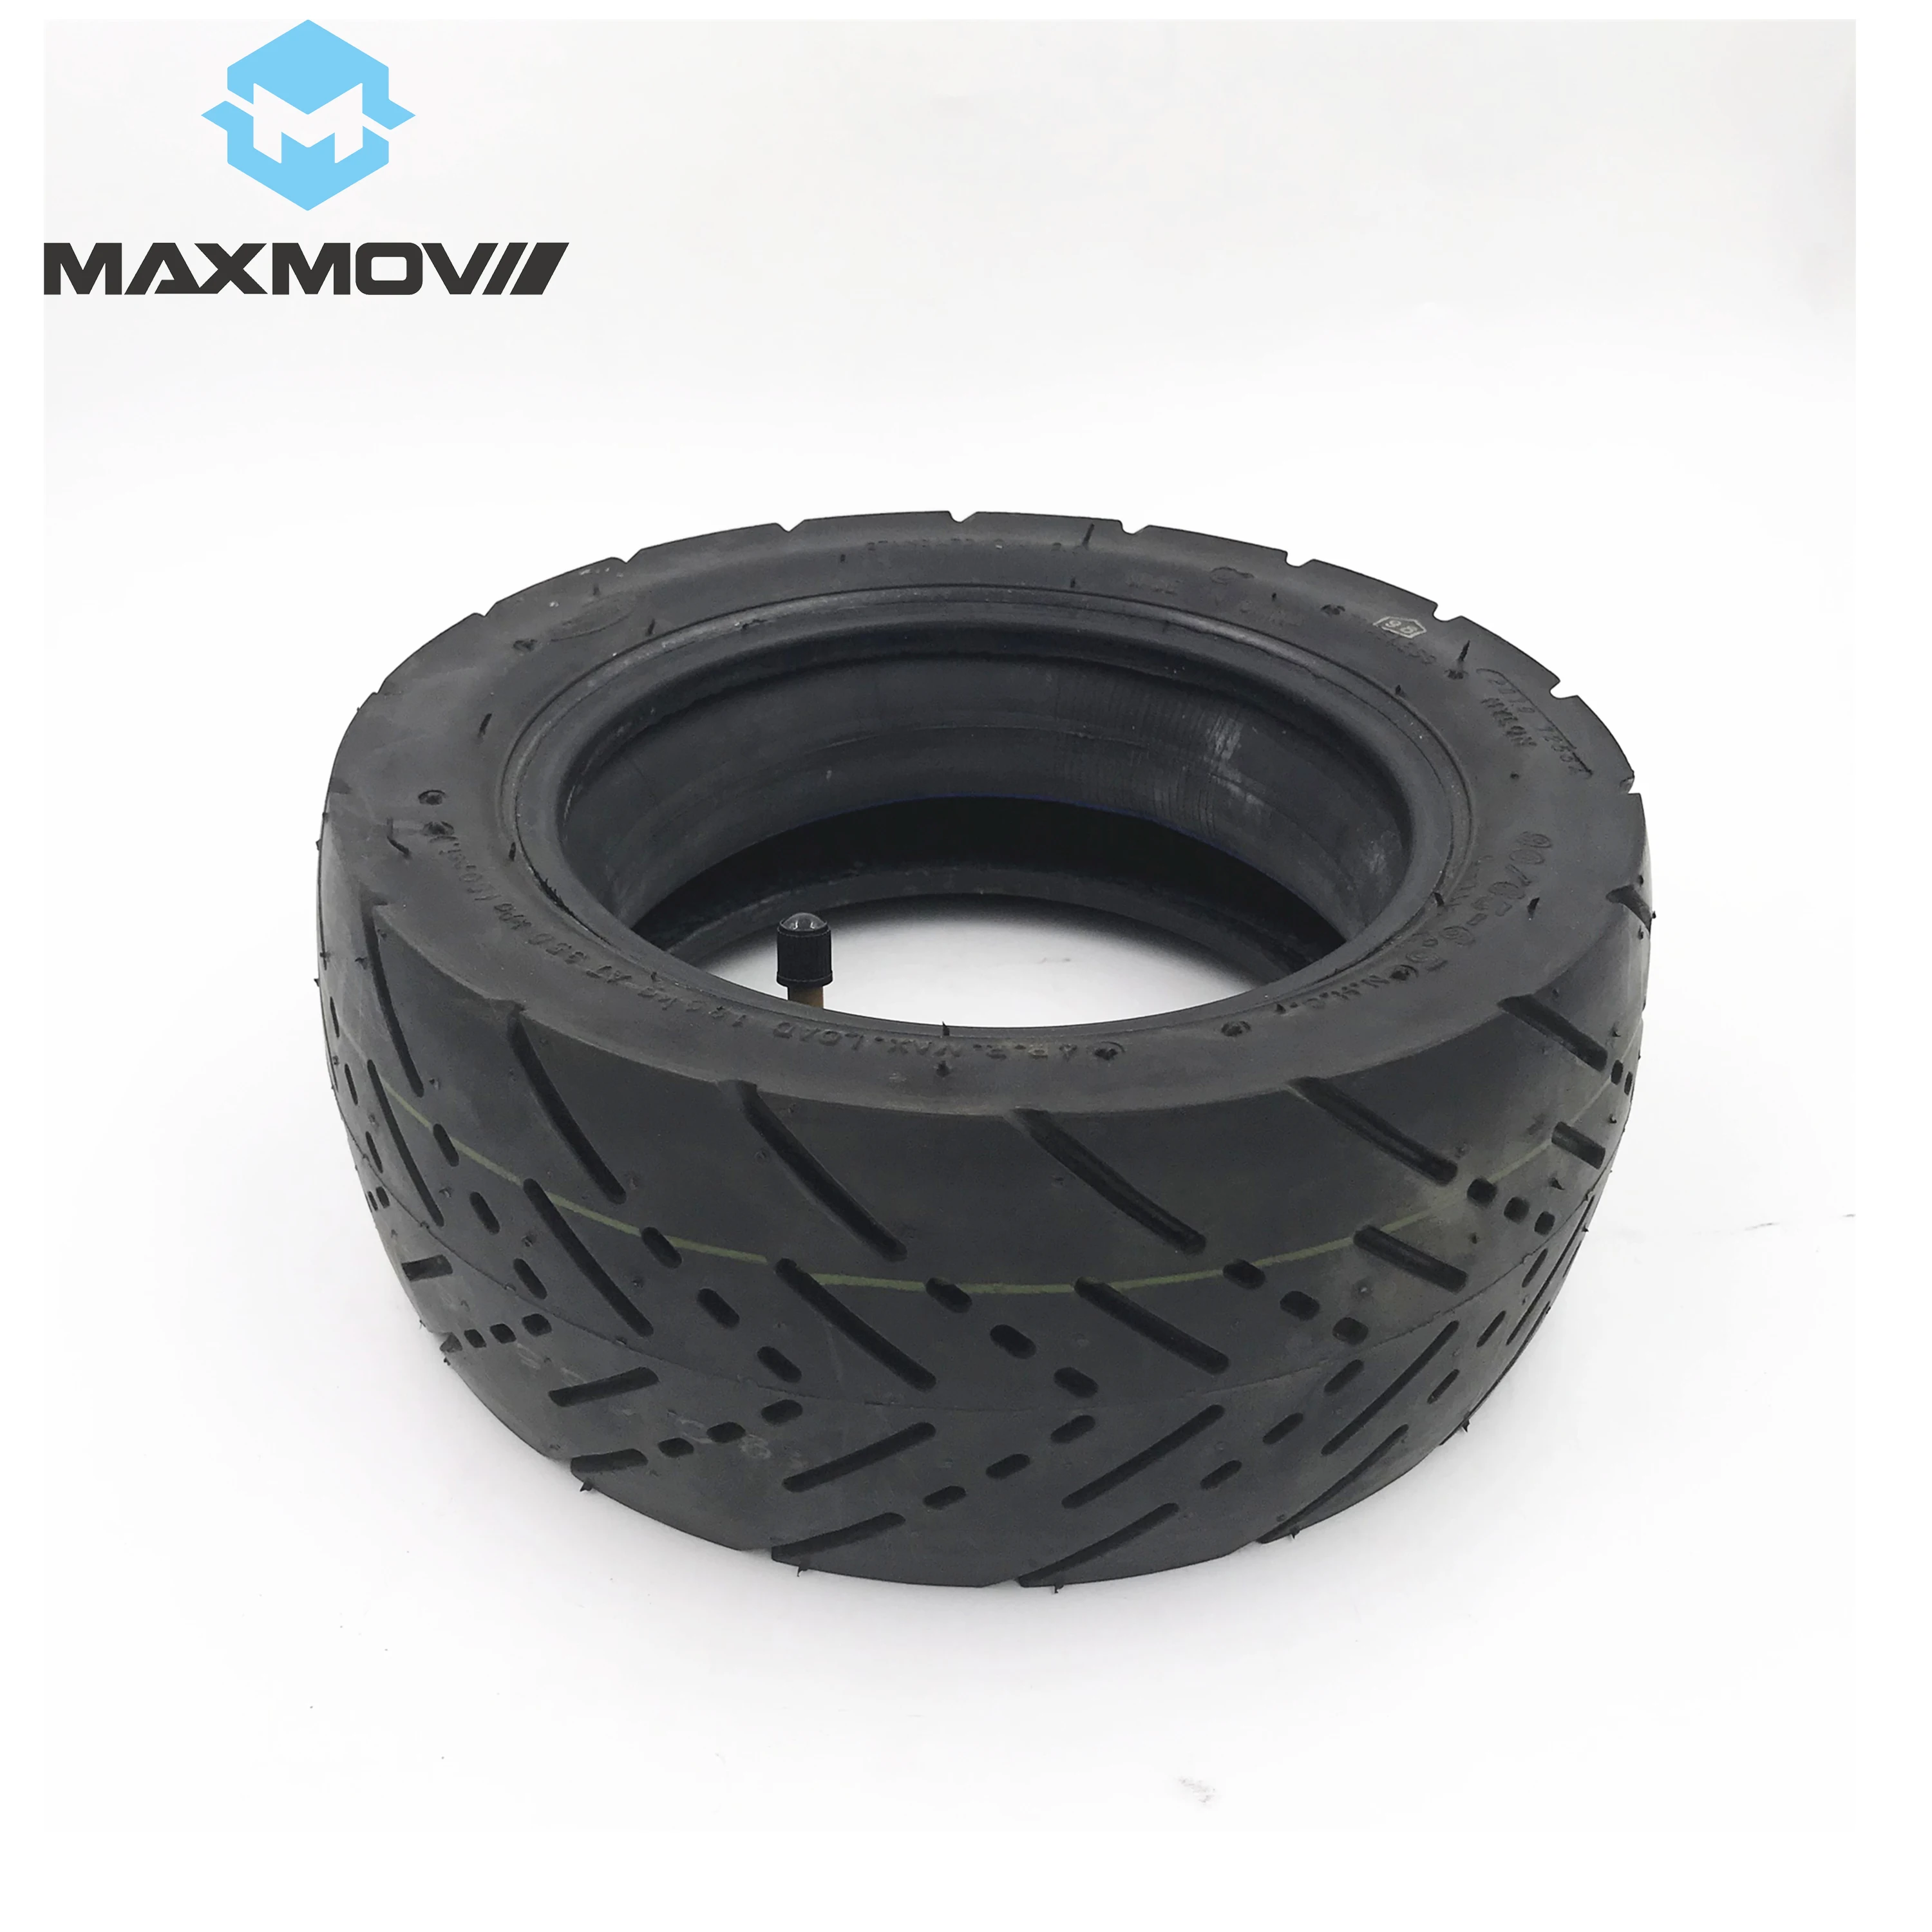 Electric Motorcycle Scooter Tyres Cst 90 65 6 5 On Road Tyres With Inner Tube Buy Scooter Tyre 90 65 6 5 10inch Scooter Tyres Butyl Rubber Inner Tyre Tubes Scrap Product On Alibaba Com